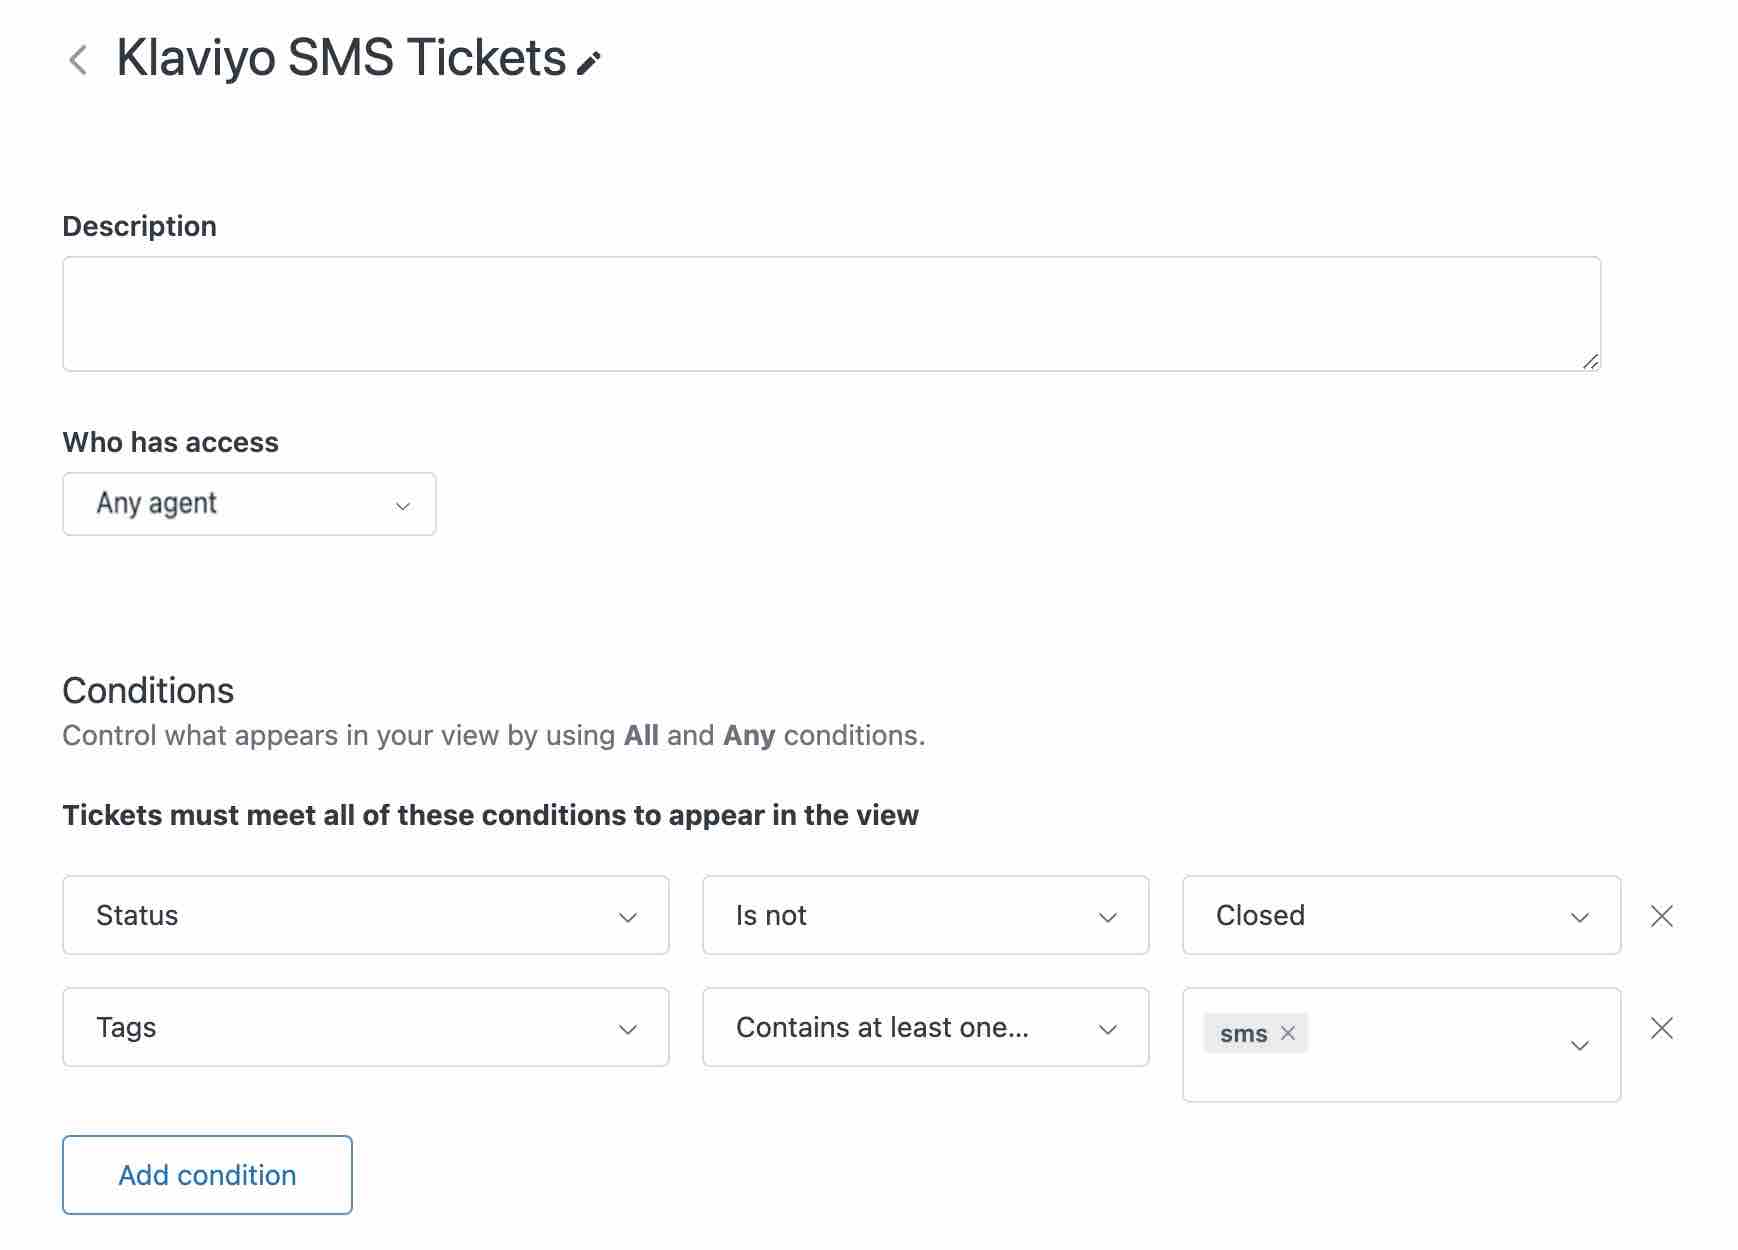 View in Zendesk called Klaviyo SMS Tickets defined by tickets with the tag sms that are not closed